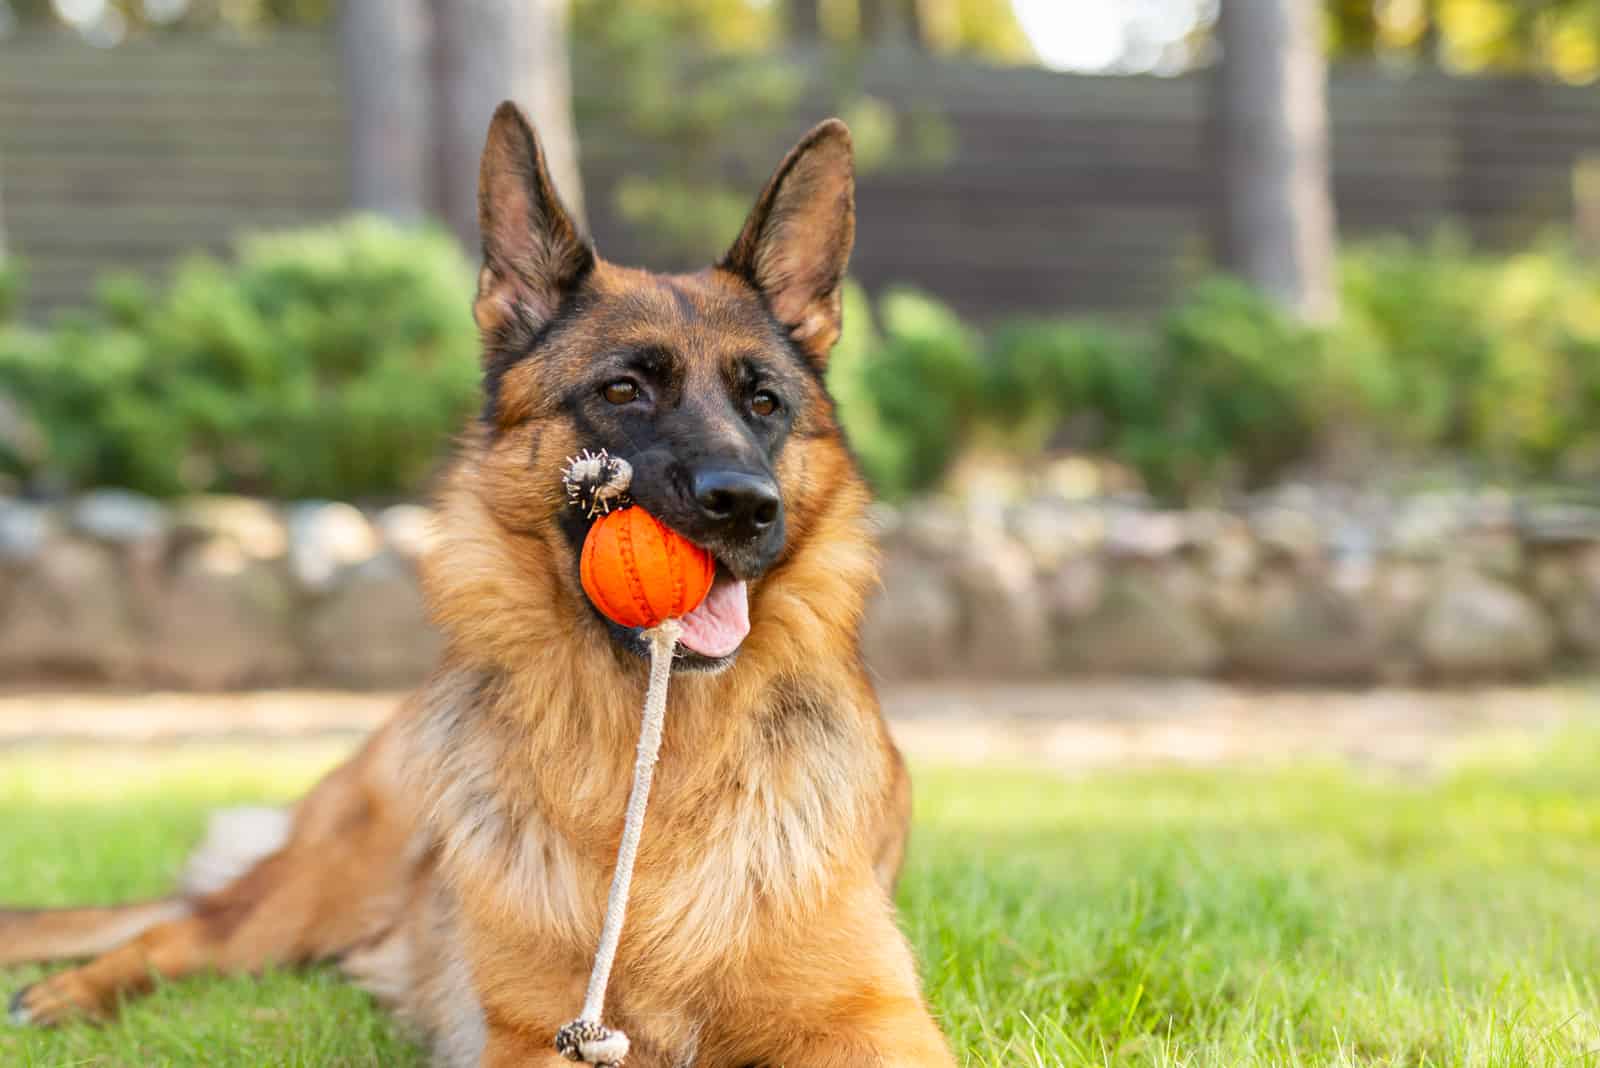 German shepherd dog playing with an orange ball in its mouth